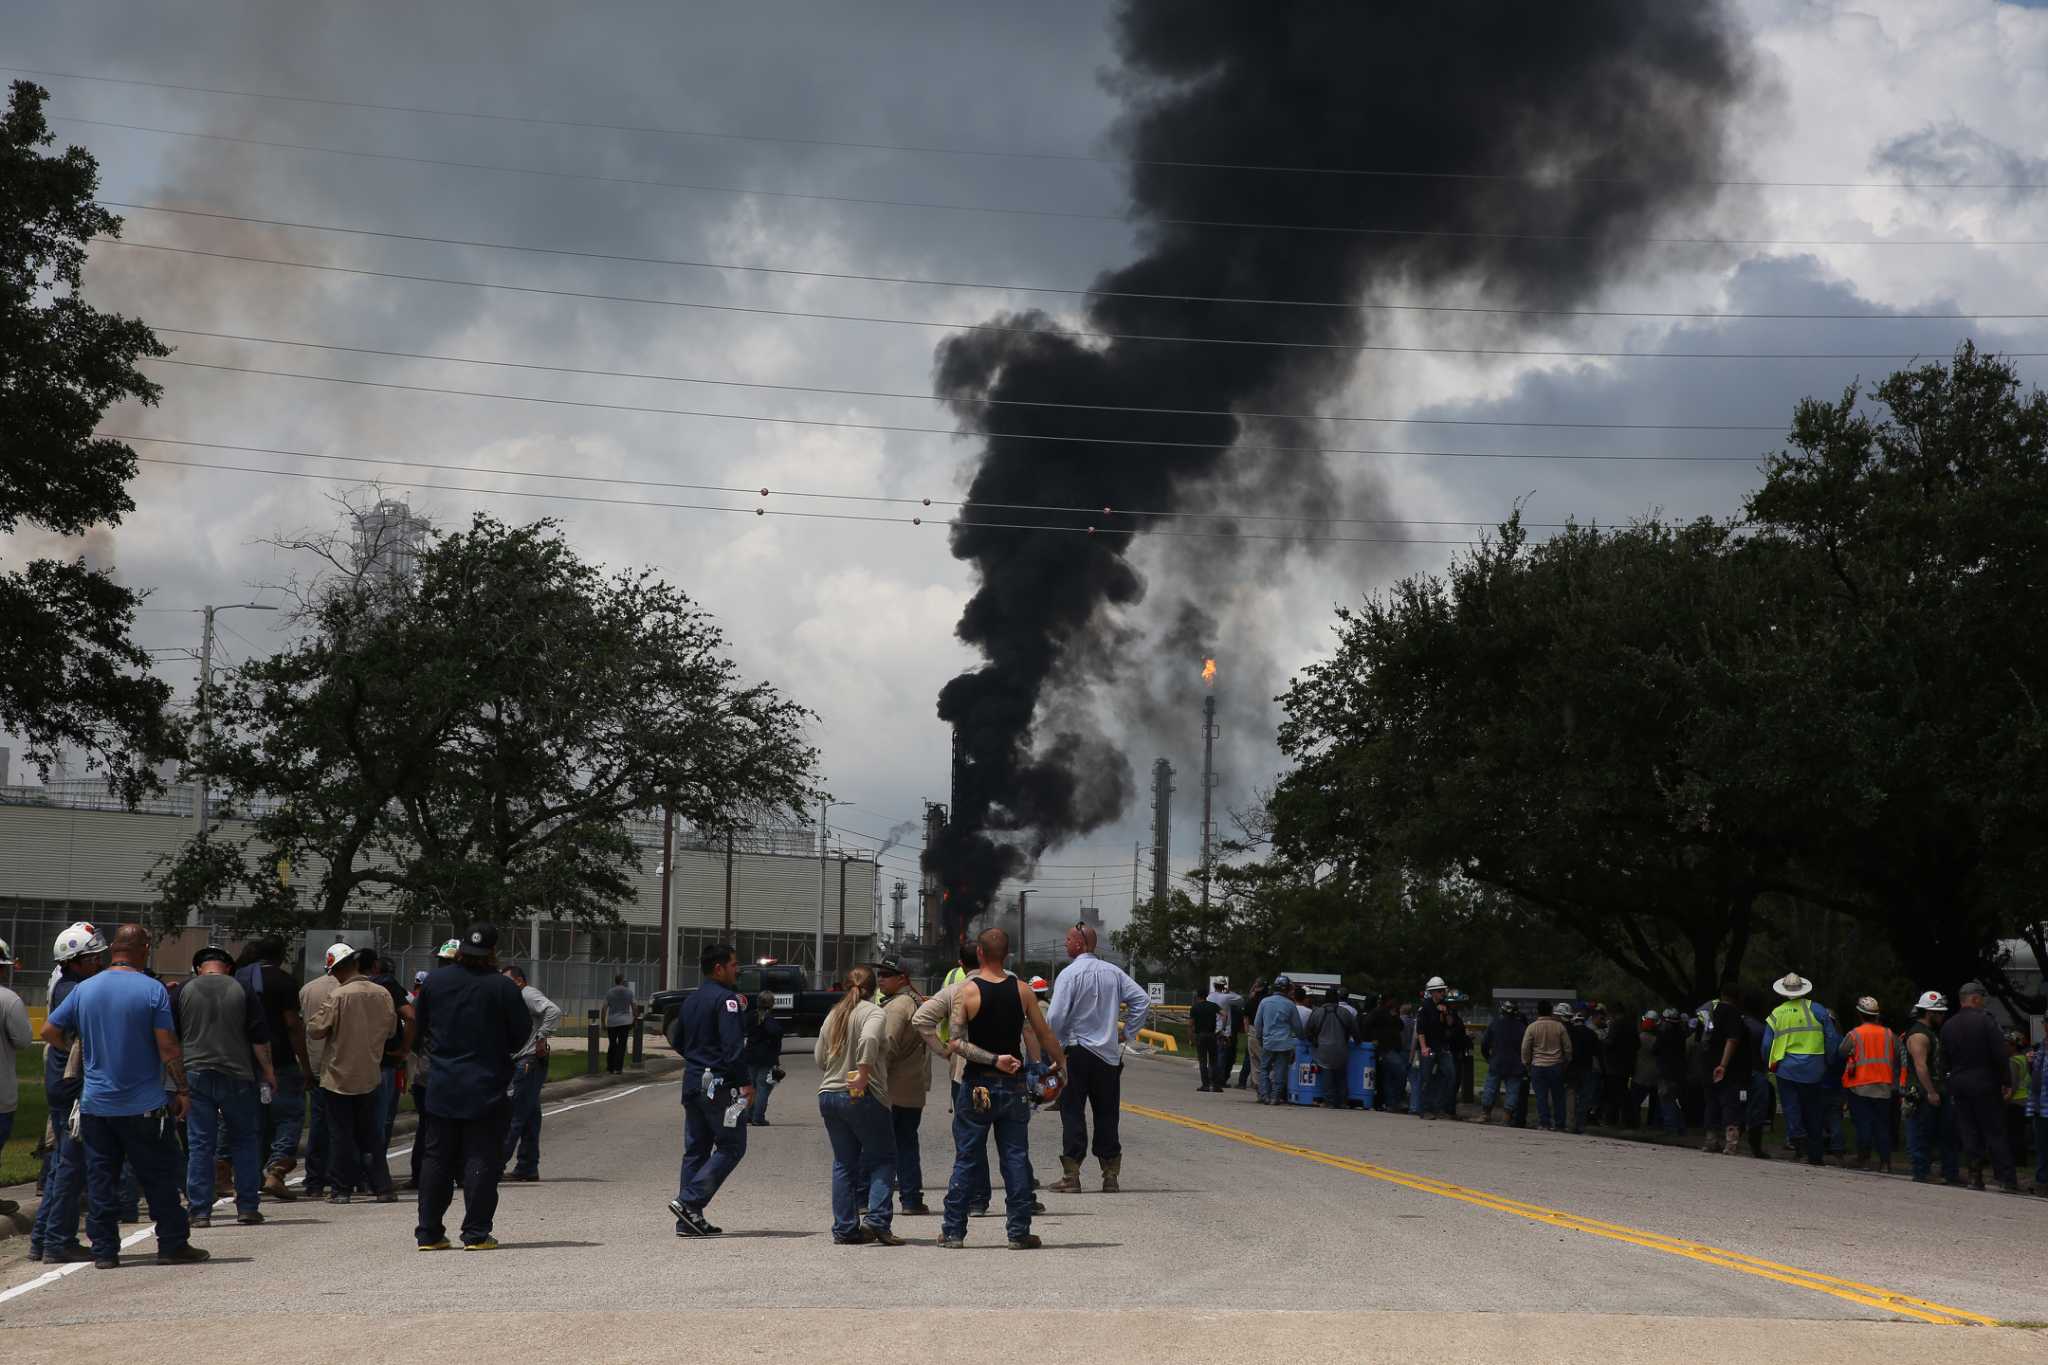 37 people injured from explosion at Exxon Mobil plant in Baytown; shelter-in-place ...